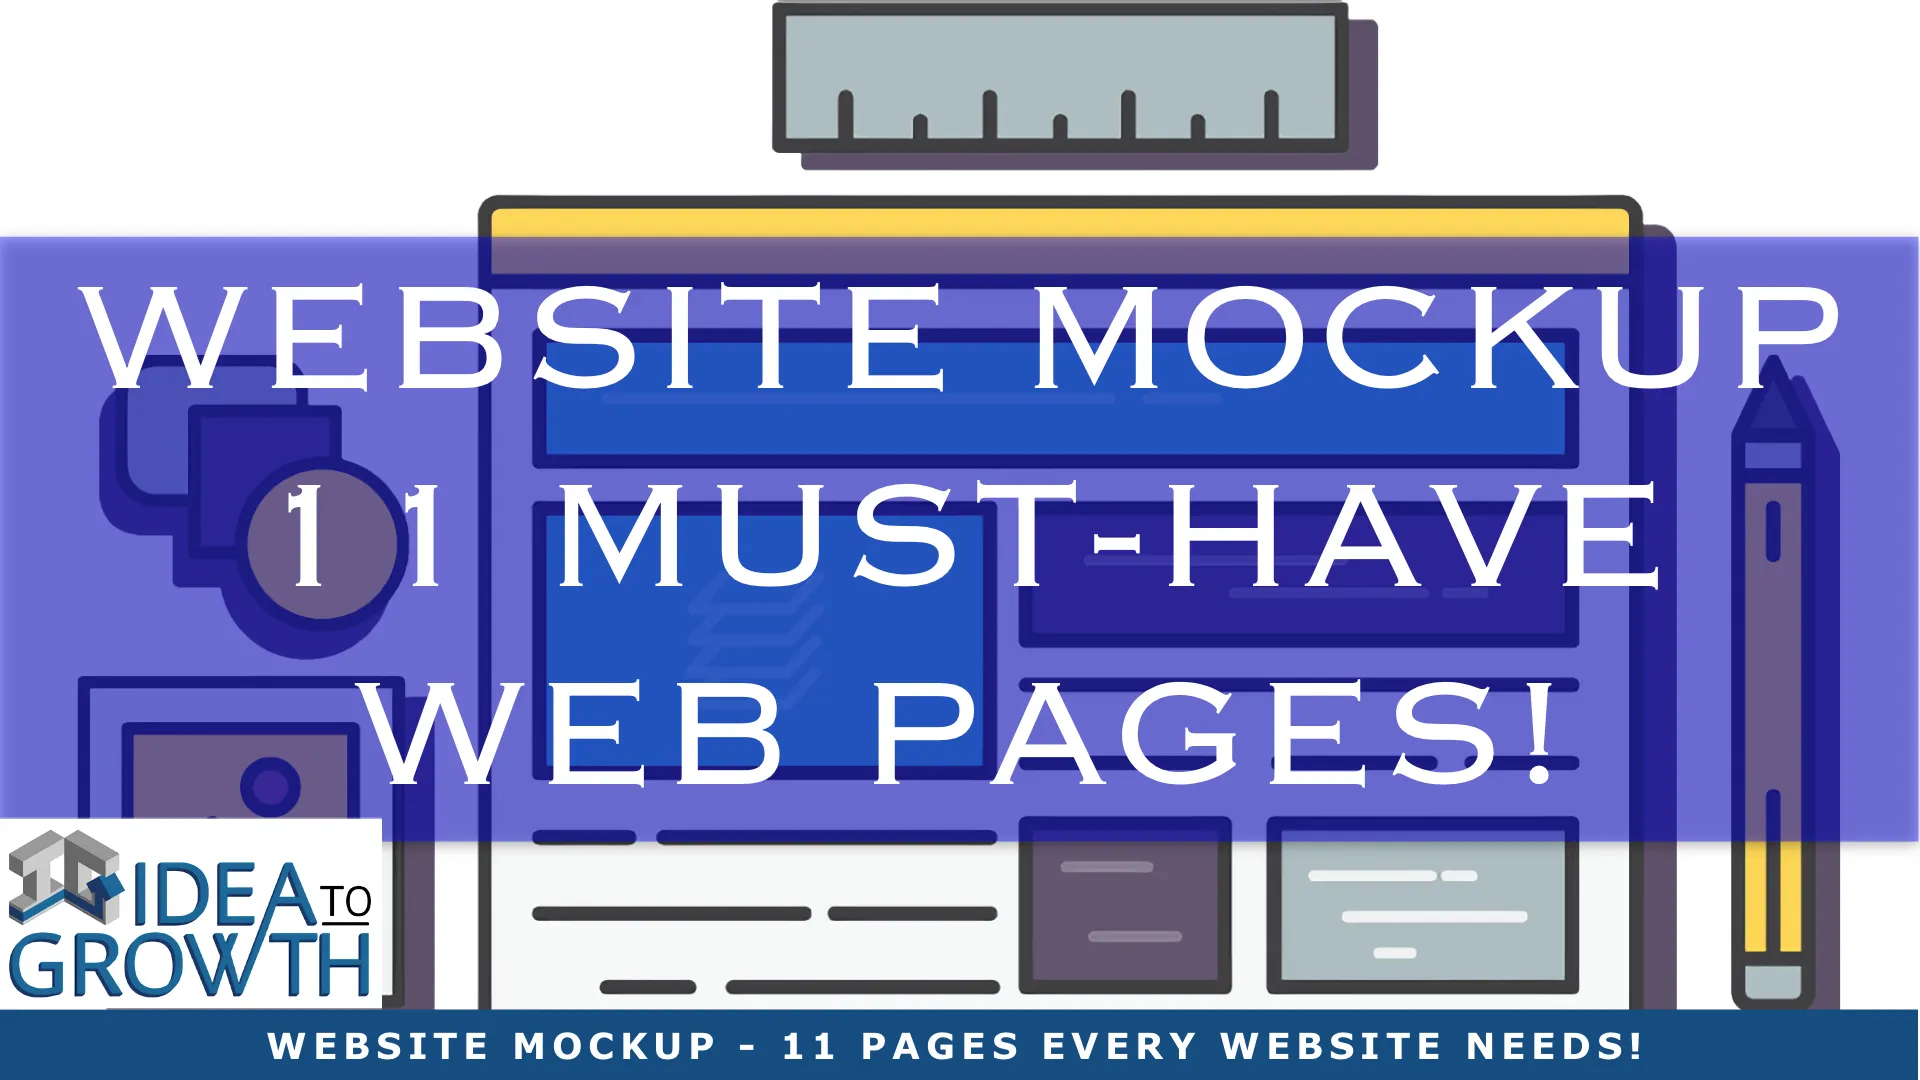 WEBSITE MOCKUP - 11 MUST-HAVE WEB PAGES